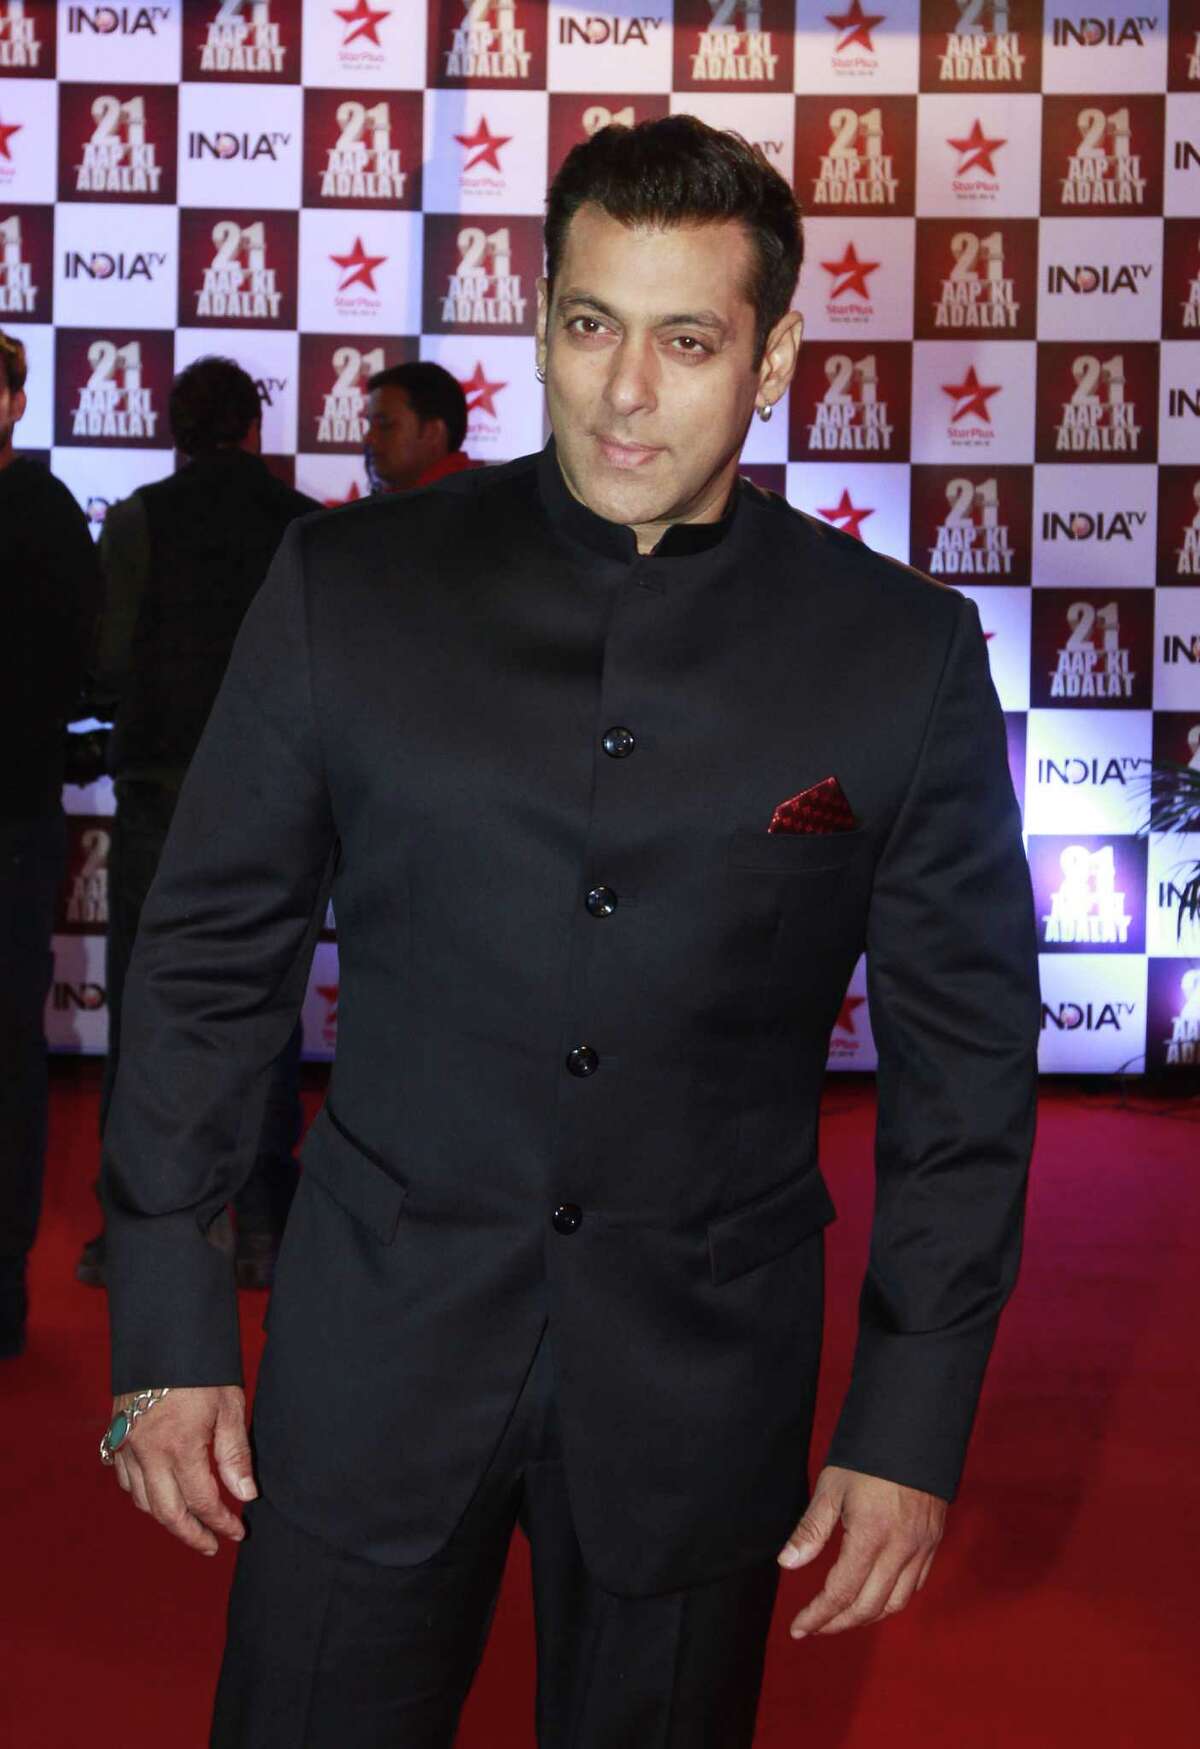 Bollywood actor Salman Khan is under fire for comparing himself to a "raped woman." He is among some of the biggest names in Bollywood. Take a look through the gallery to see India's most famous actors according to IMDB.